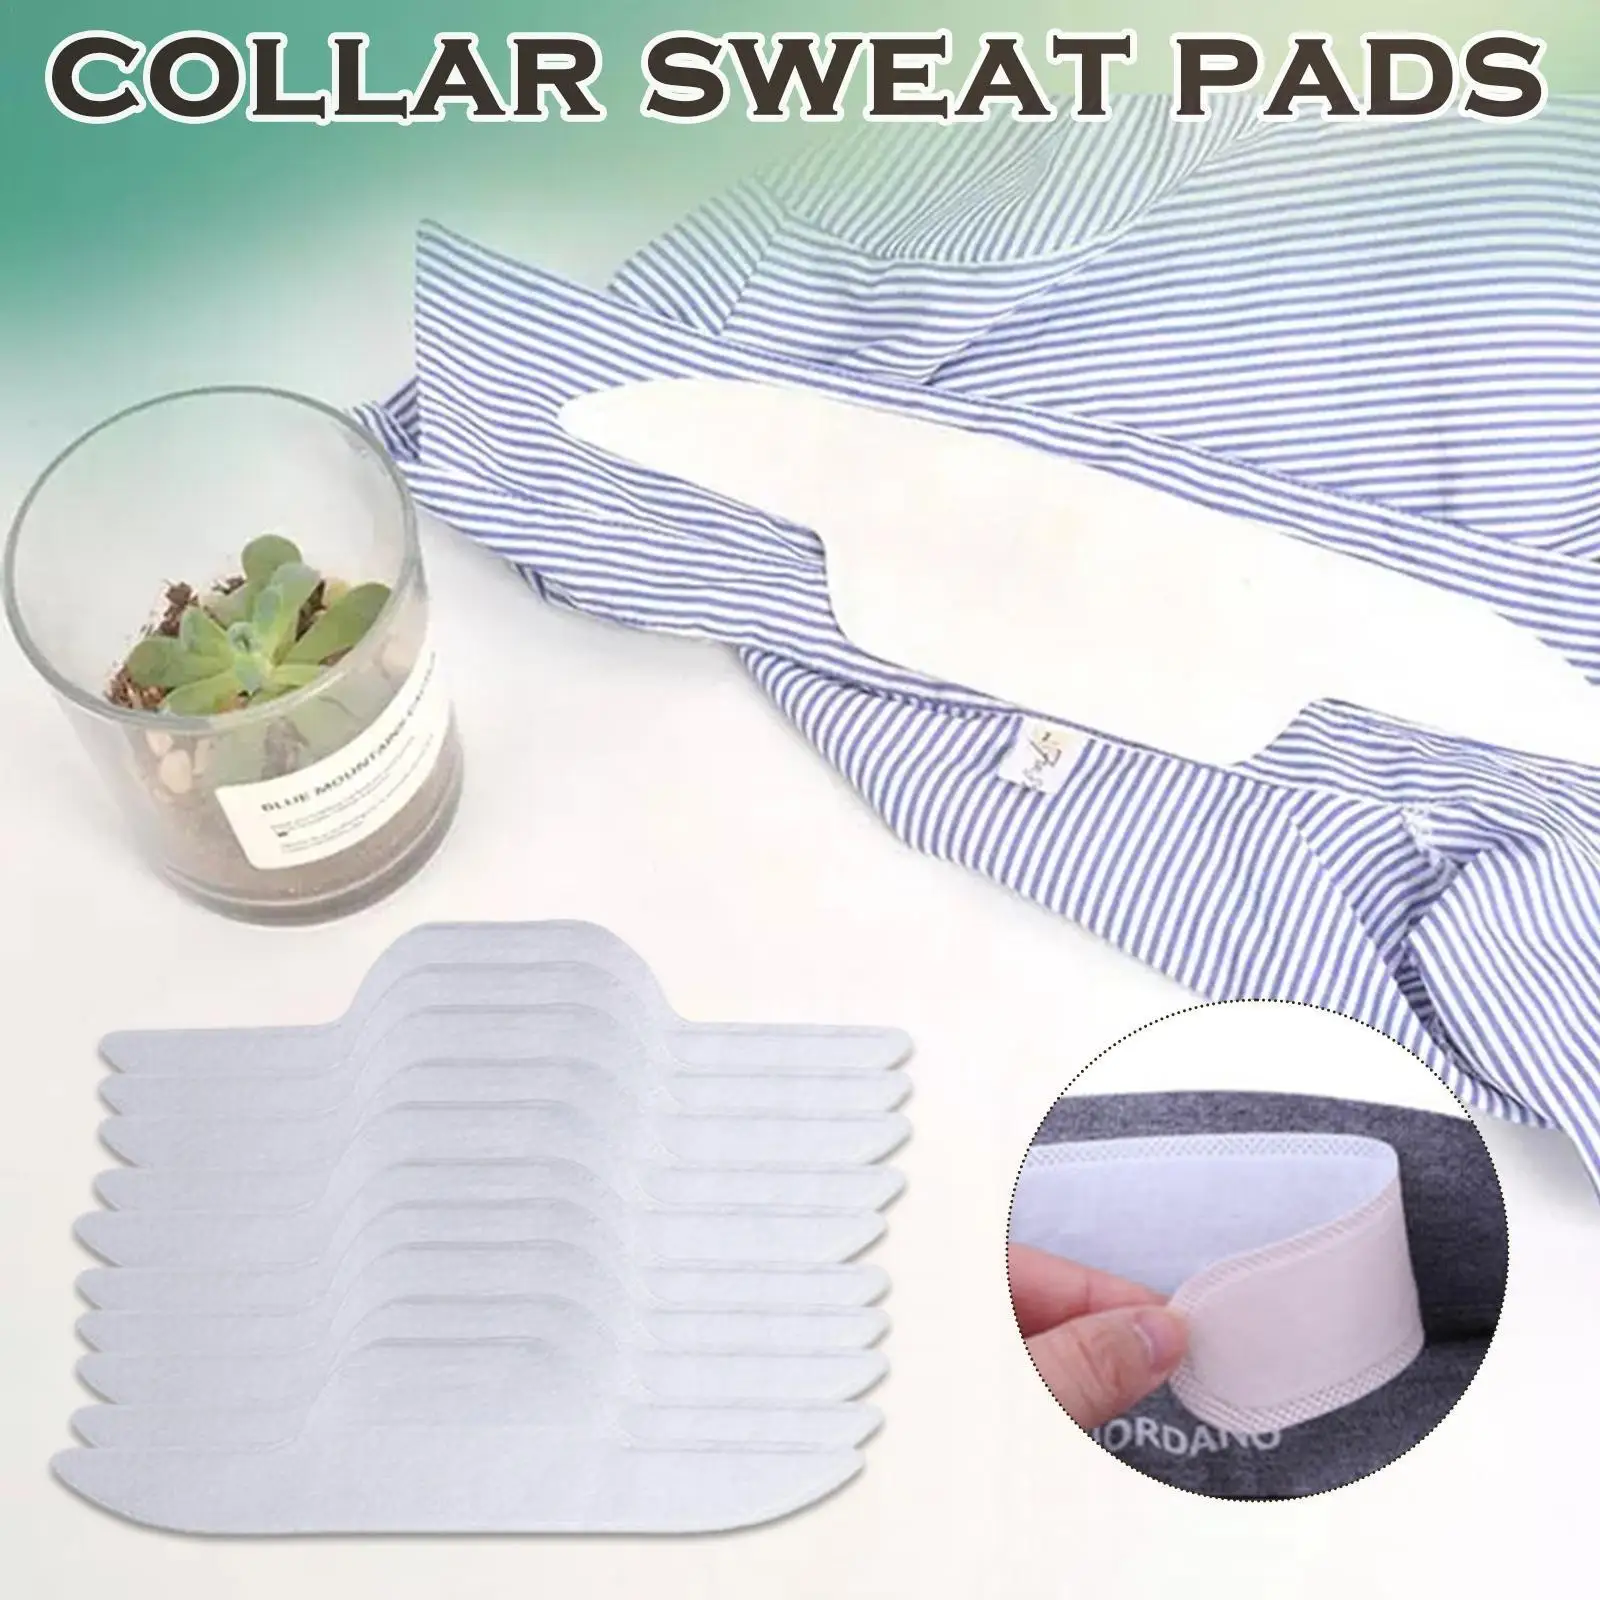 

10pcs Summer Collar Sweat Pads Disposable White T-shirt Absorbing Deodorants Stickers Anti Perspiration Collar Pad For Unis Z8D3